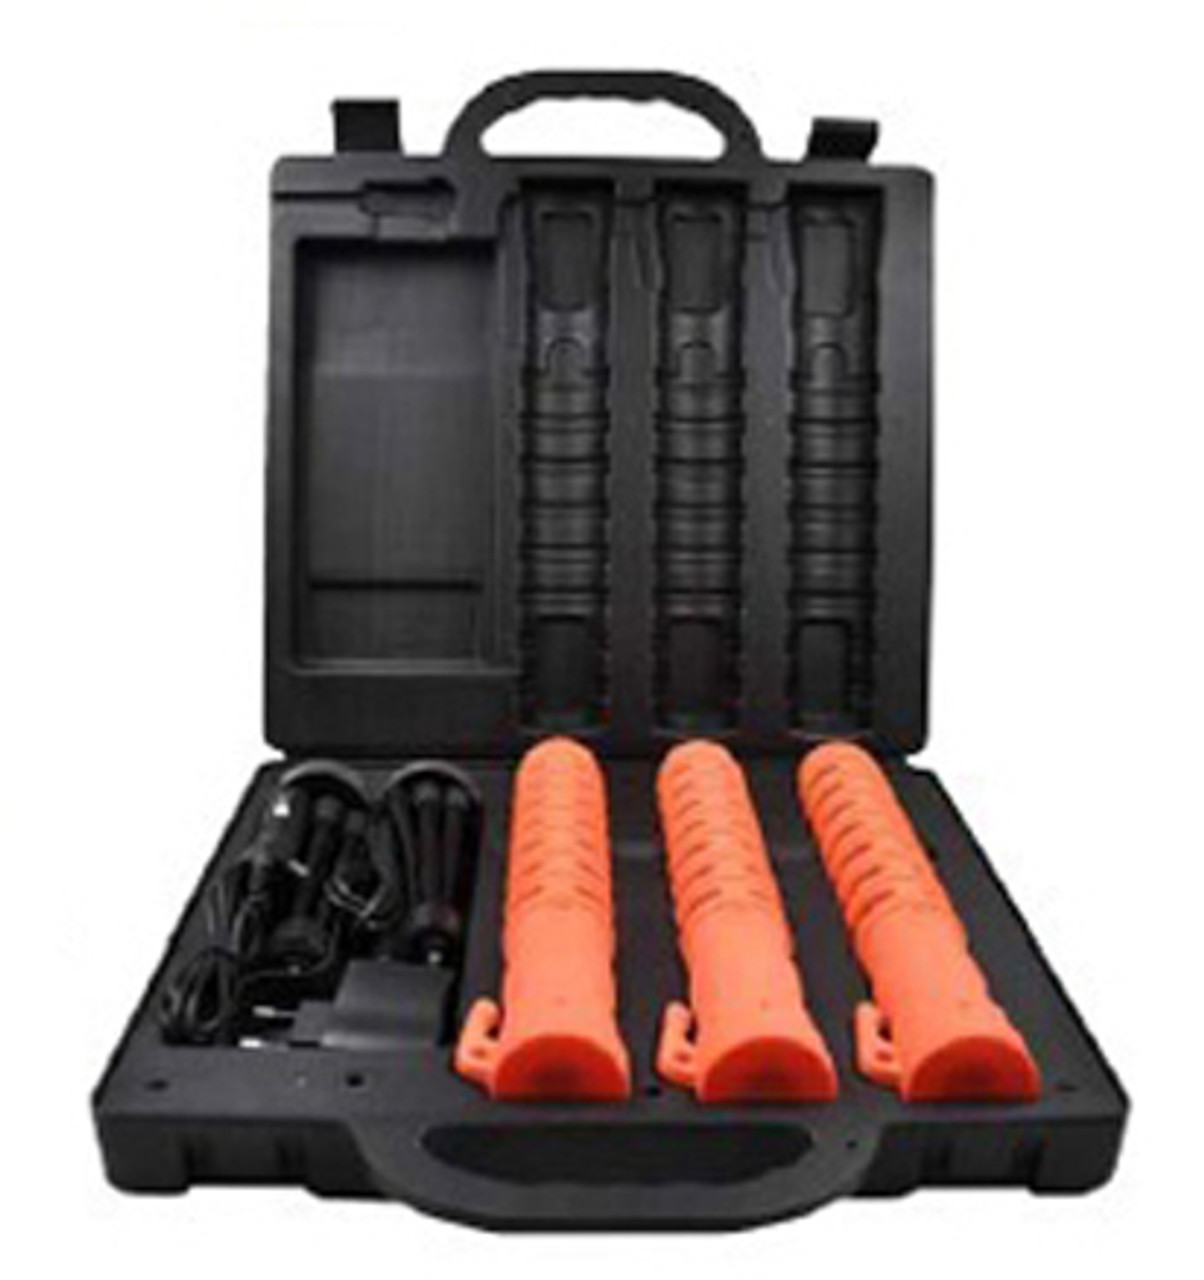 3-Piece LED Baton Flare Emergency Safety Kit w/ Charge Case Car and Wall Charger USB and stand Amber Race Sport Lighting